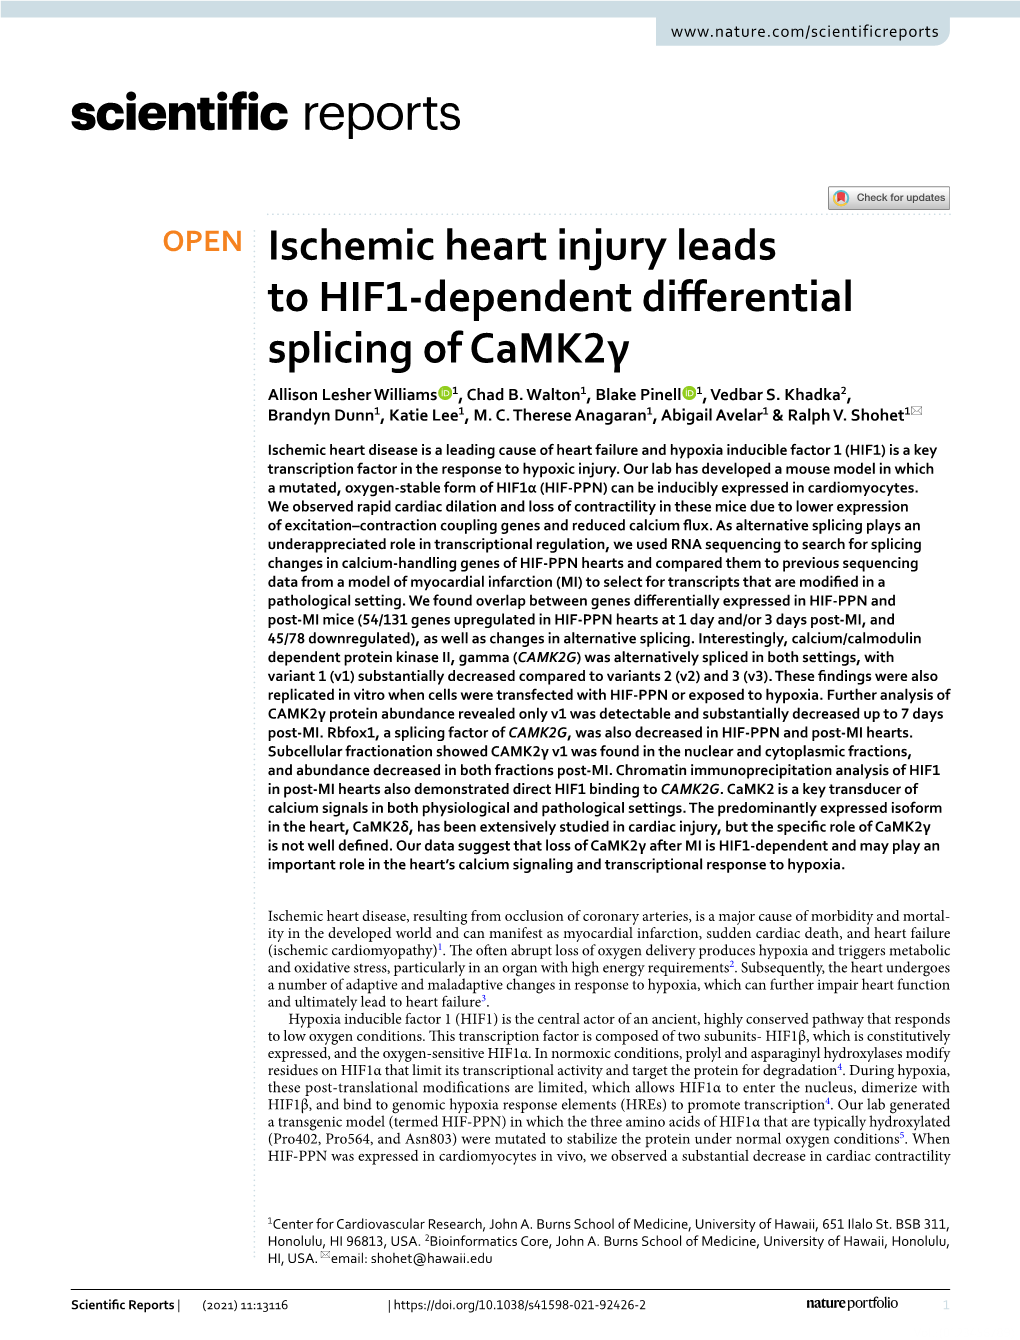 Ischemic Heart Injury Leads to HIF1-Dependent Differential Splicing